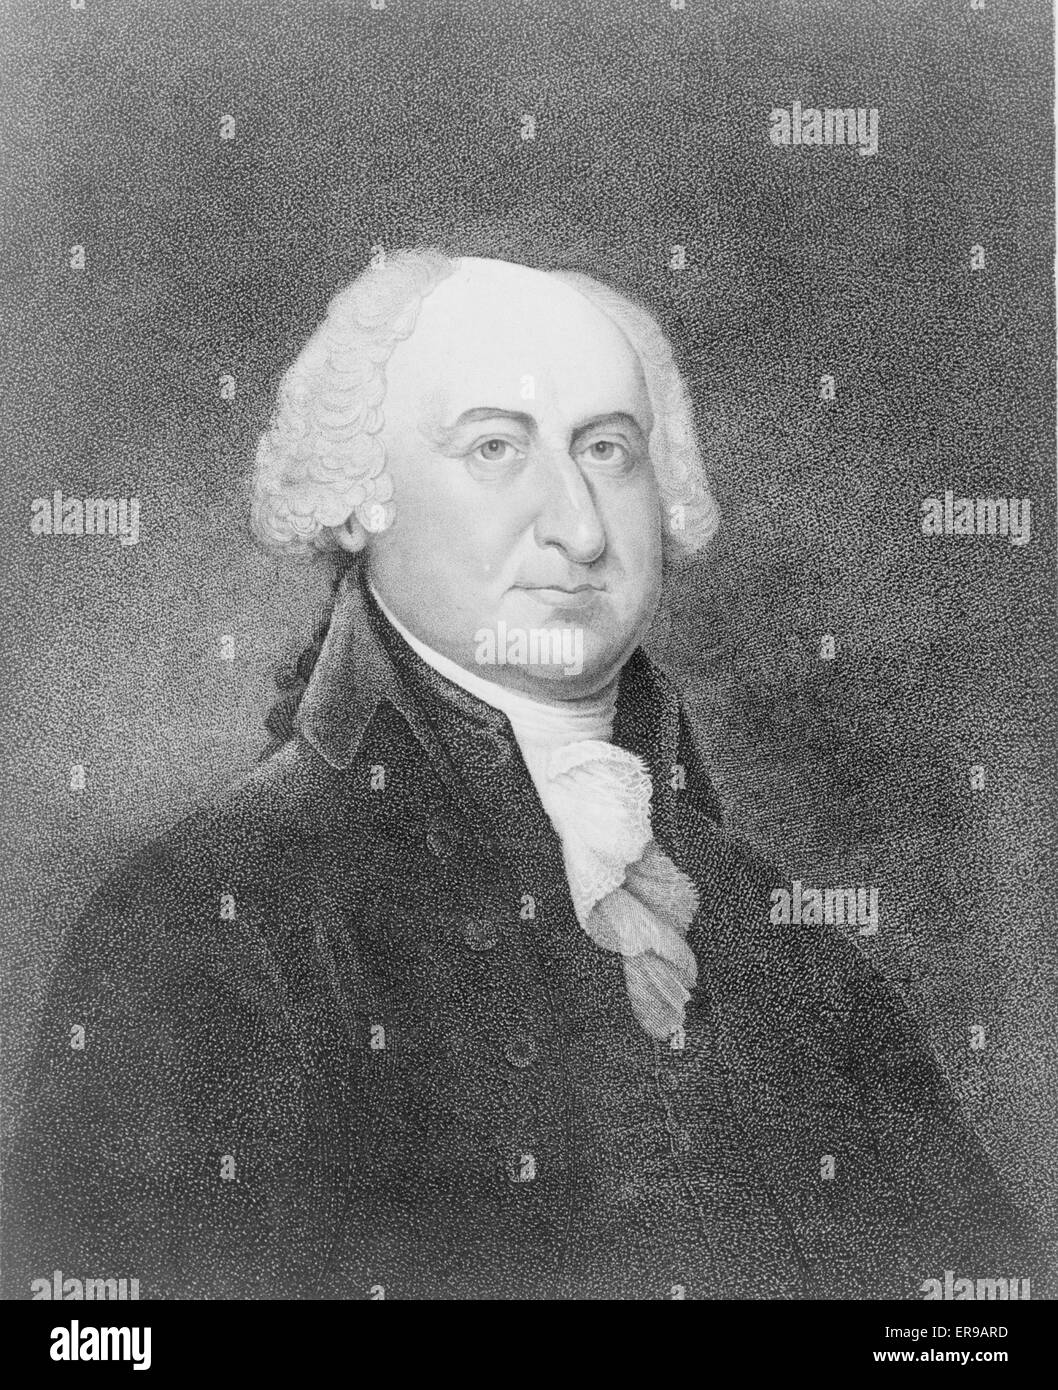 John Adams, second president of the United States of America Stock Photo